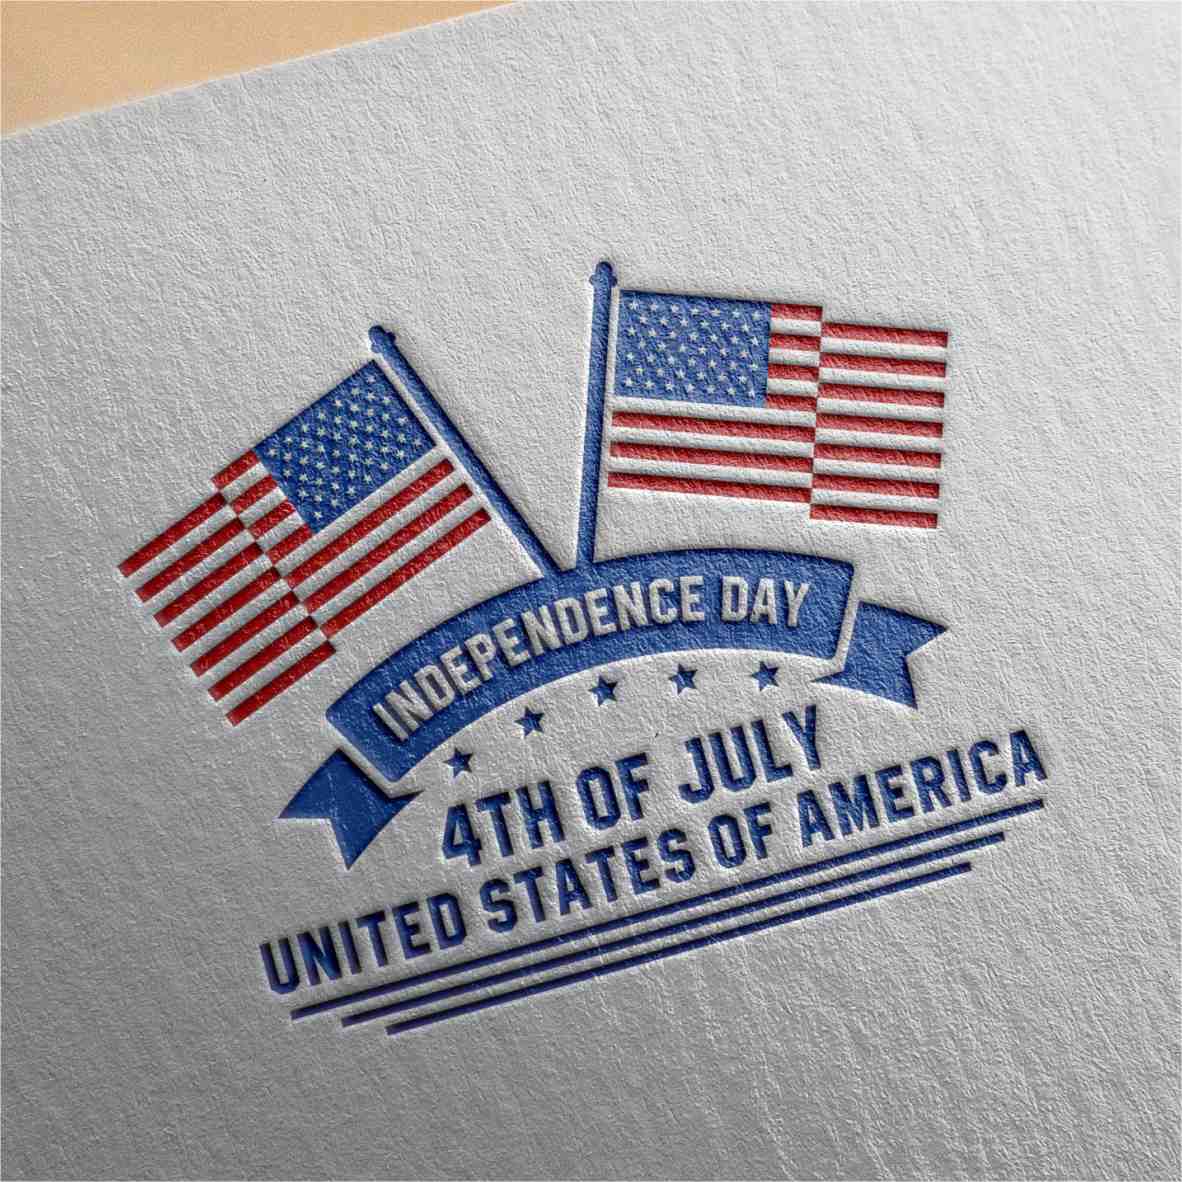 independence day 4 th july united states 8 334